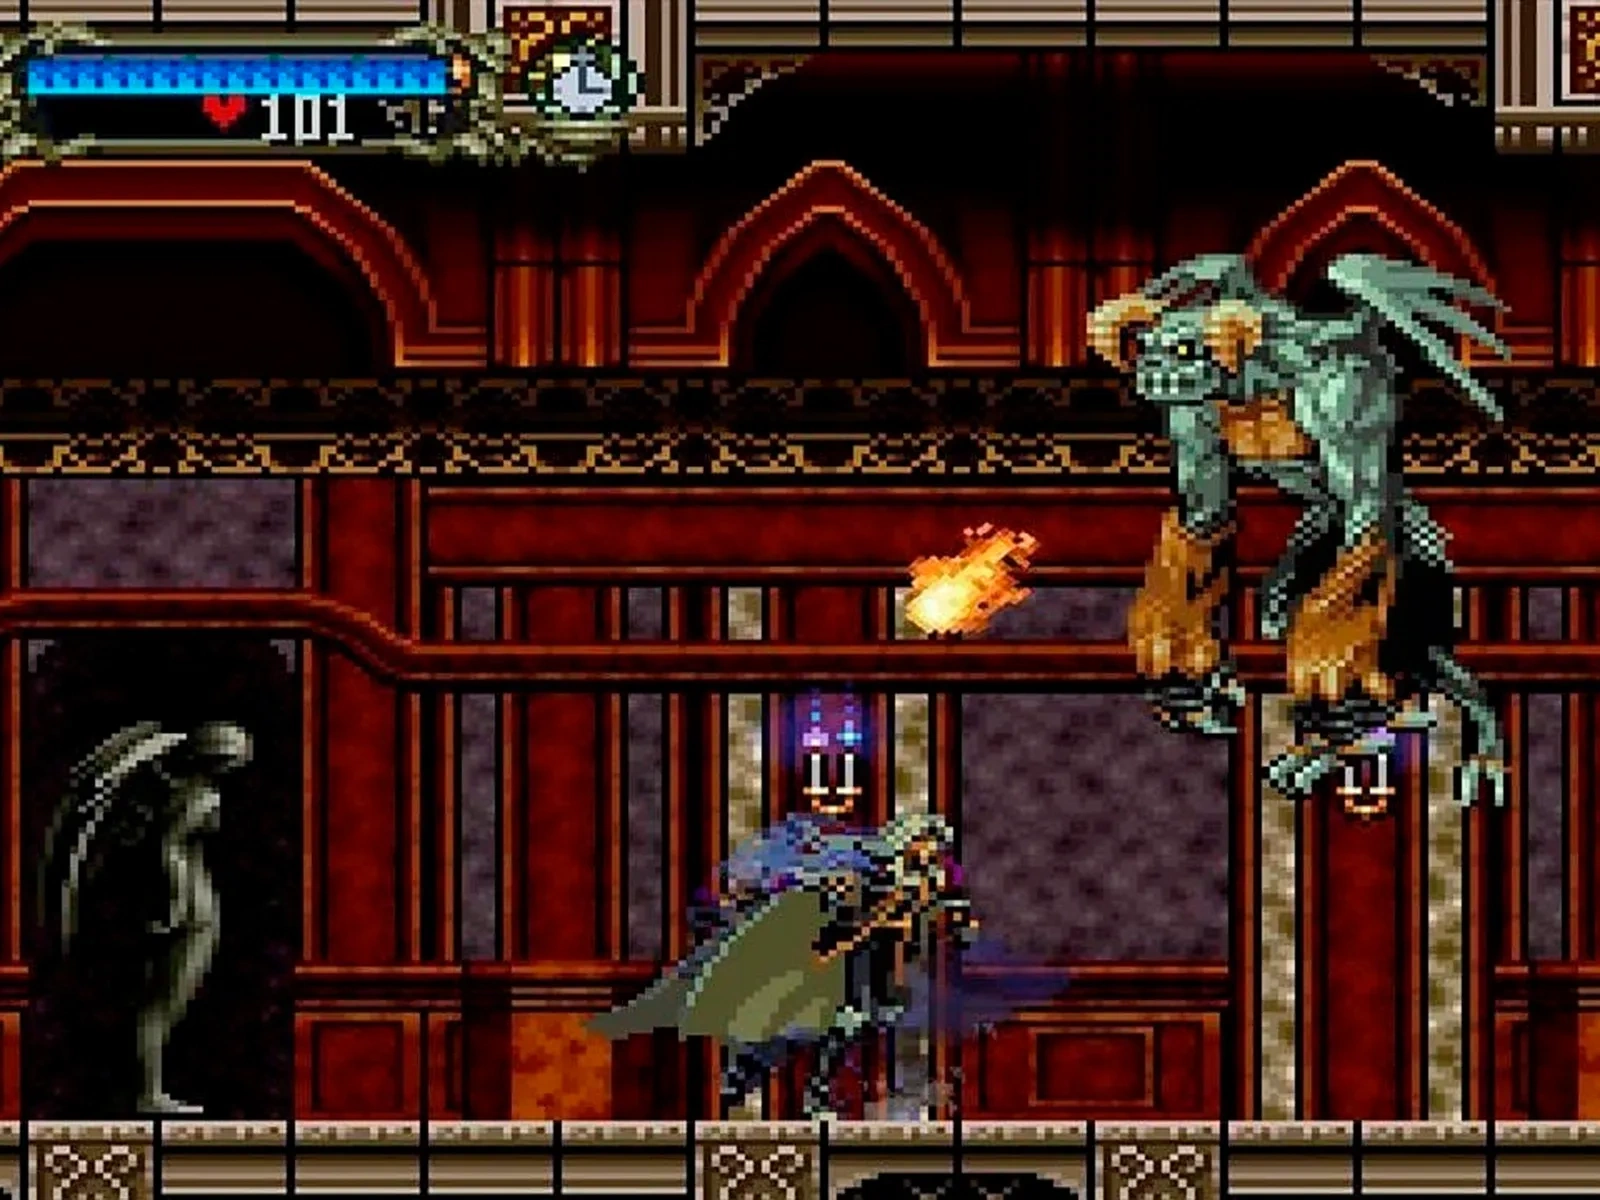 100 best games_0038_Castlevania symphony of the night.webp